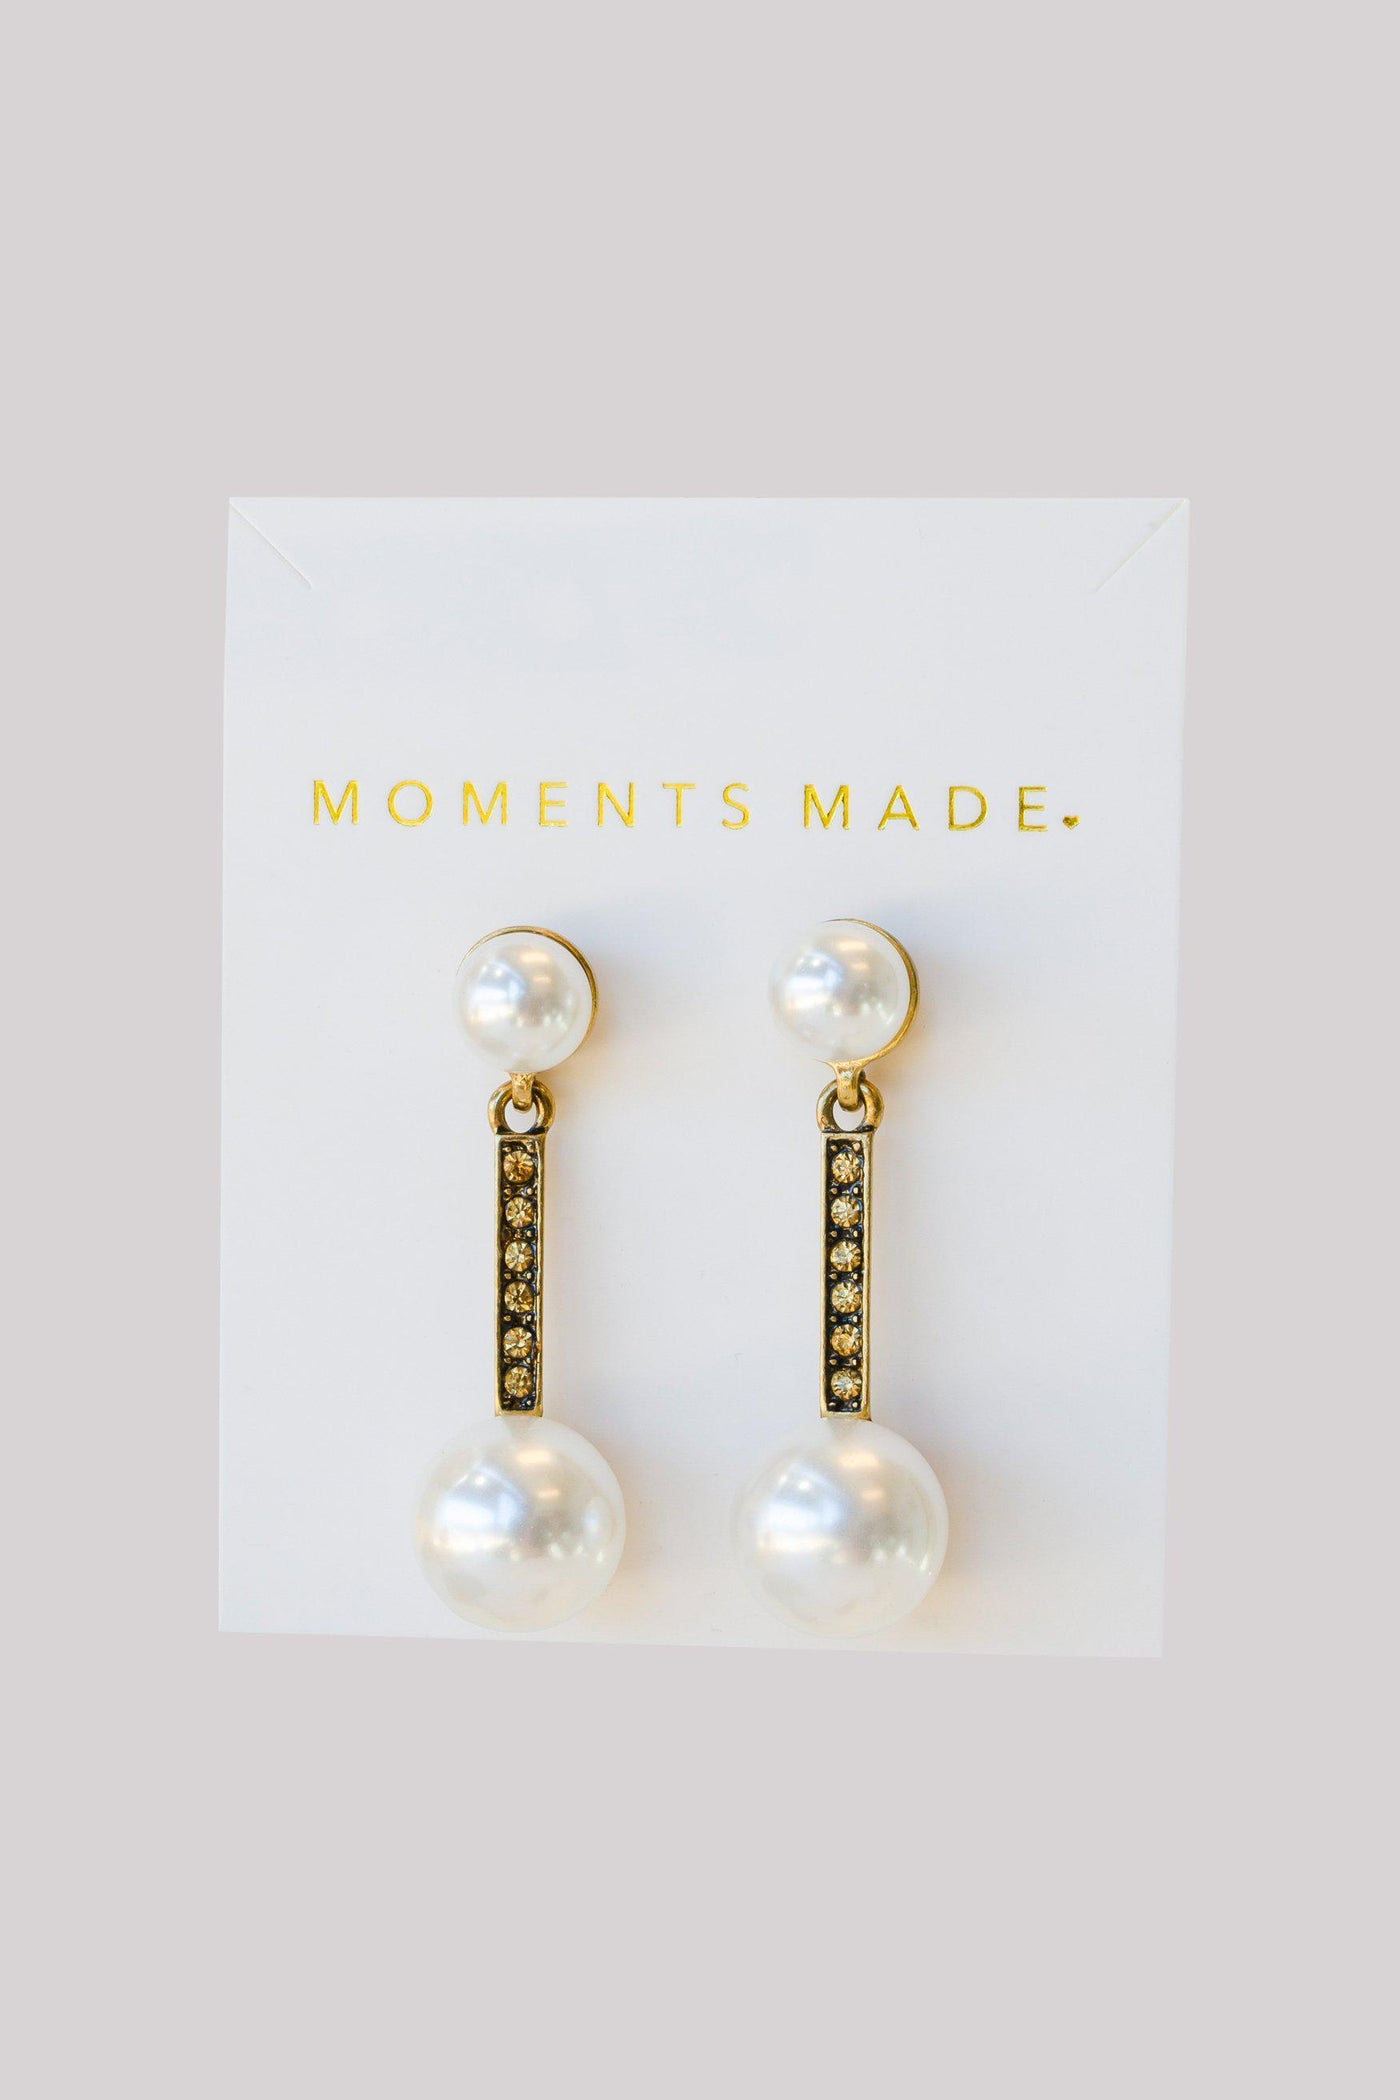 Pearl studded earrings, lined with gold dangling another larger pearl from bridal shop in salt lake city utah